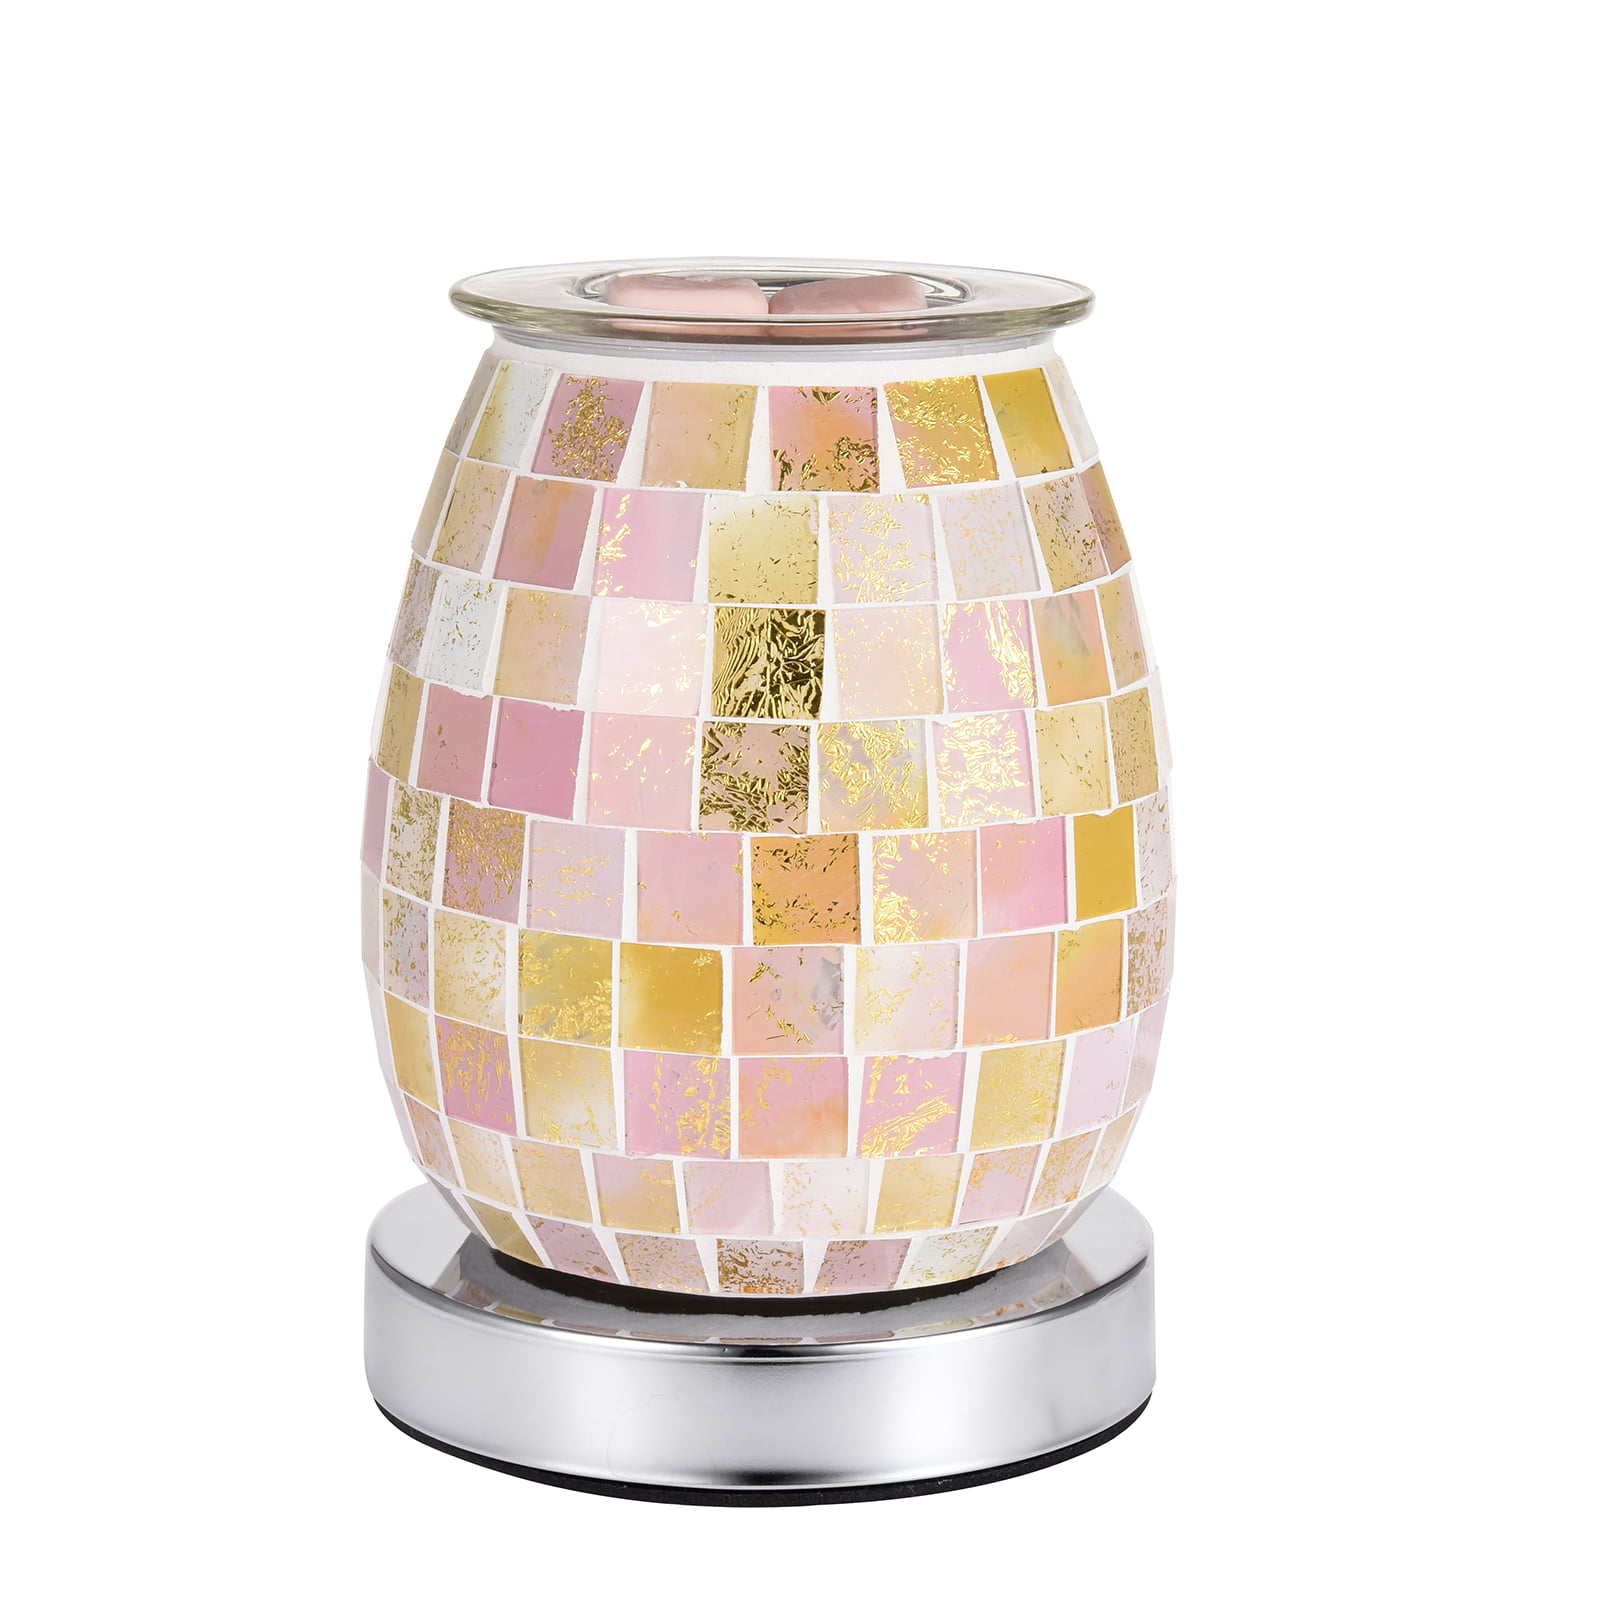 pink and gold tile mosaic wax warmer